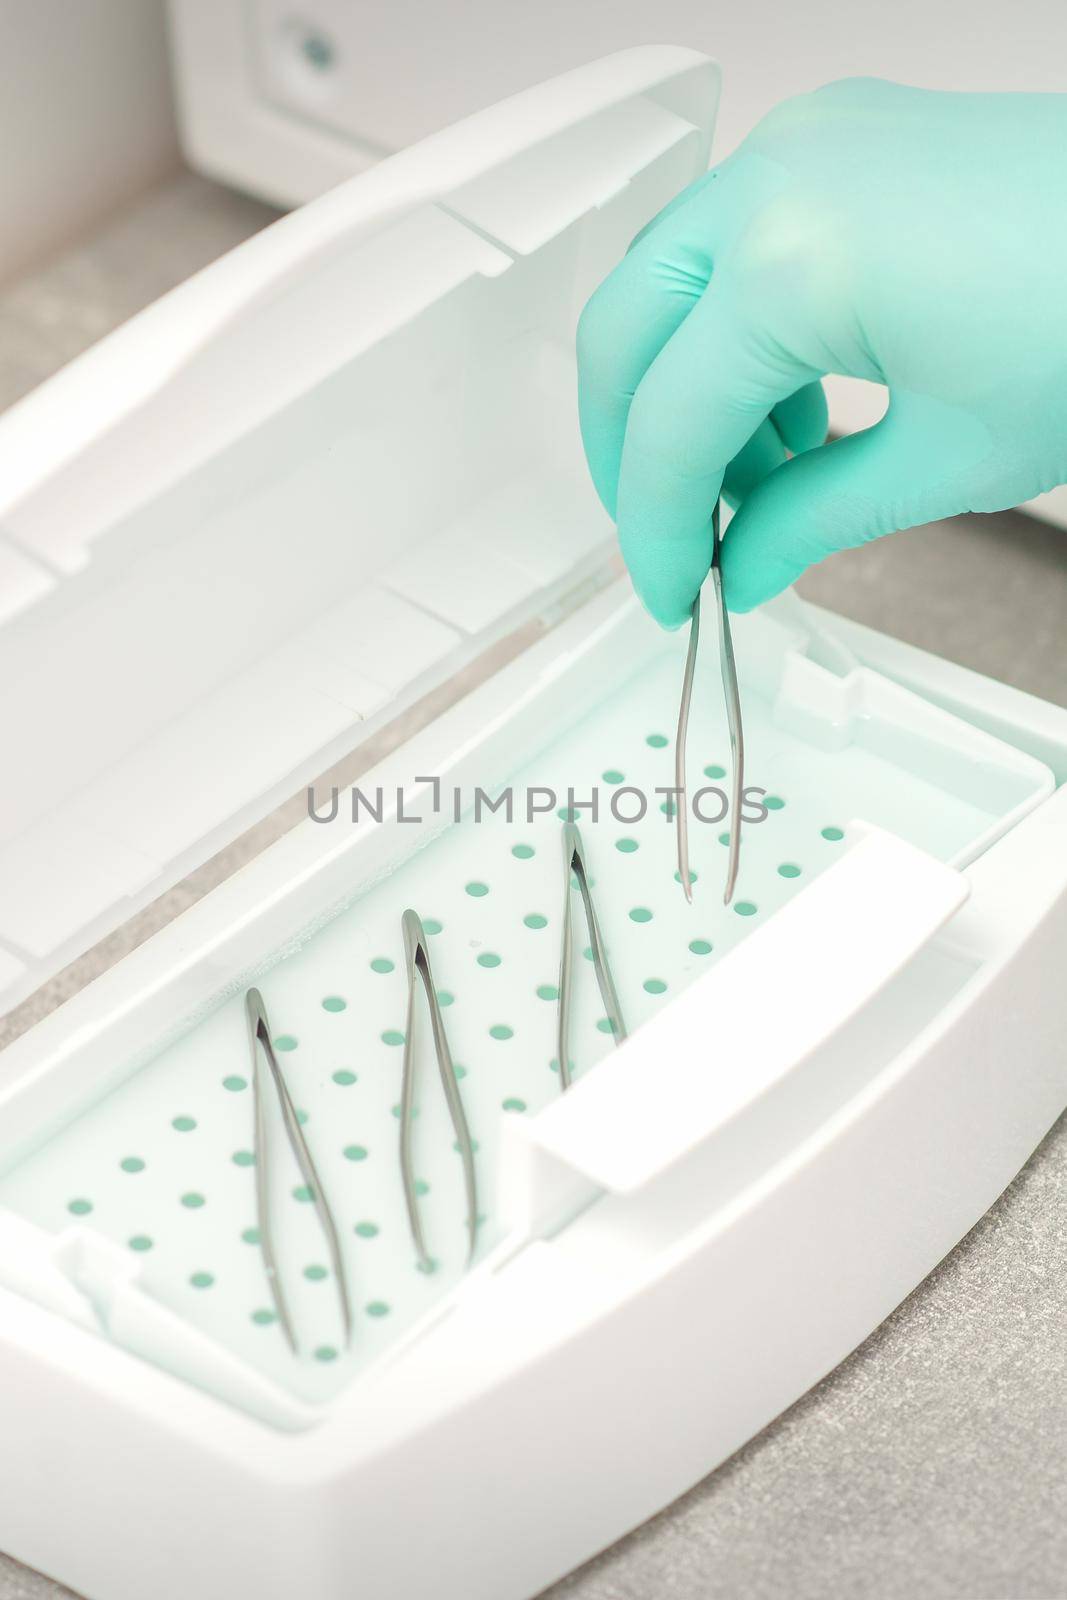 Hand disinfects tweezers with cleaning systems for medical instruments. Ultrasonic cleaner. by okskukuruza